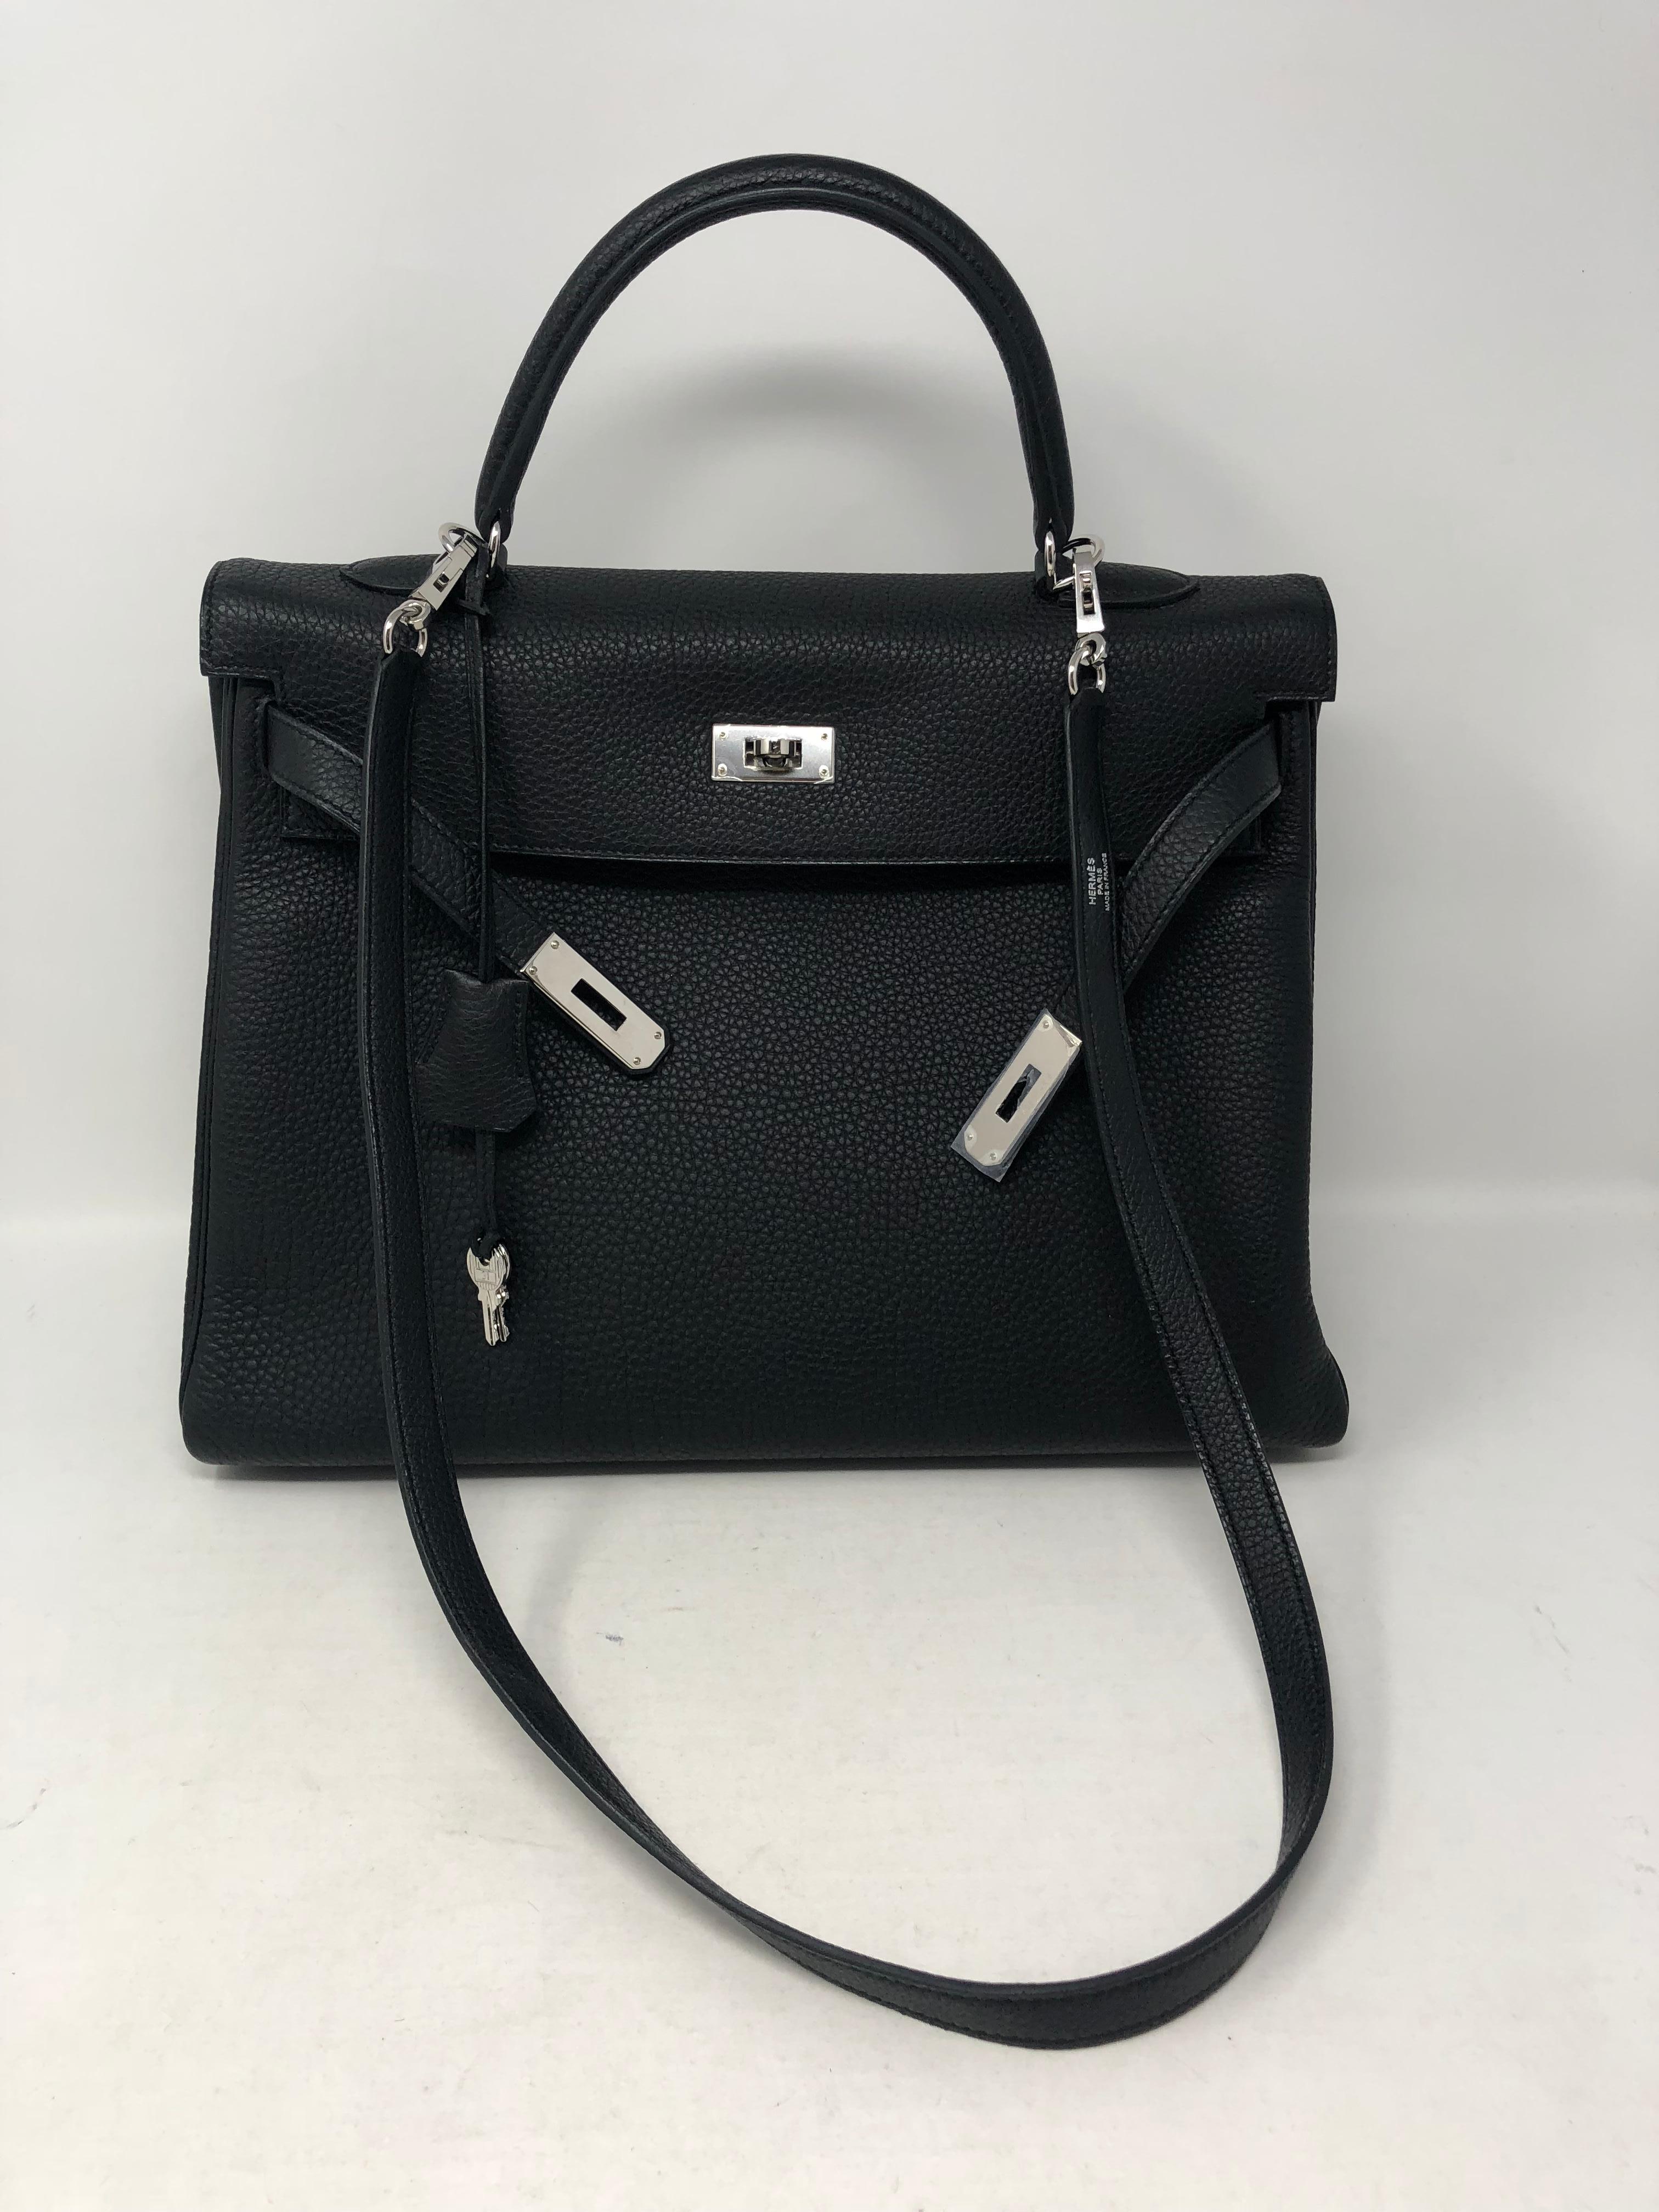 Hermes Black Kelly 35 Togo leather with Palladium hardware. Still has plastic on hardware. Never worn. From 2012. Stayed in box and looks brand new. The most wanted black Kelly will always be a classic. Don't miss out on this one. Includes strap,